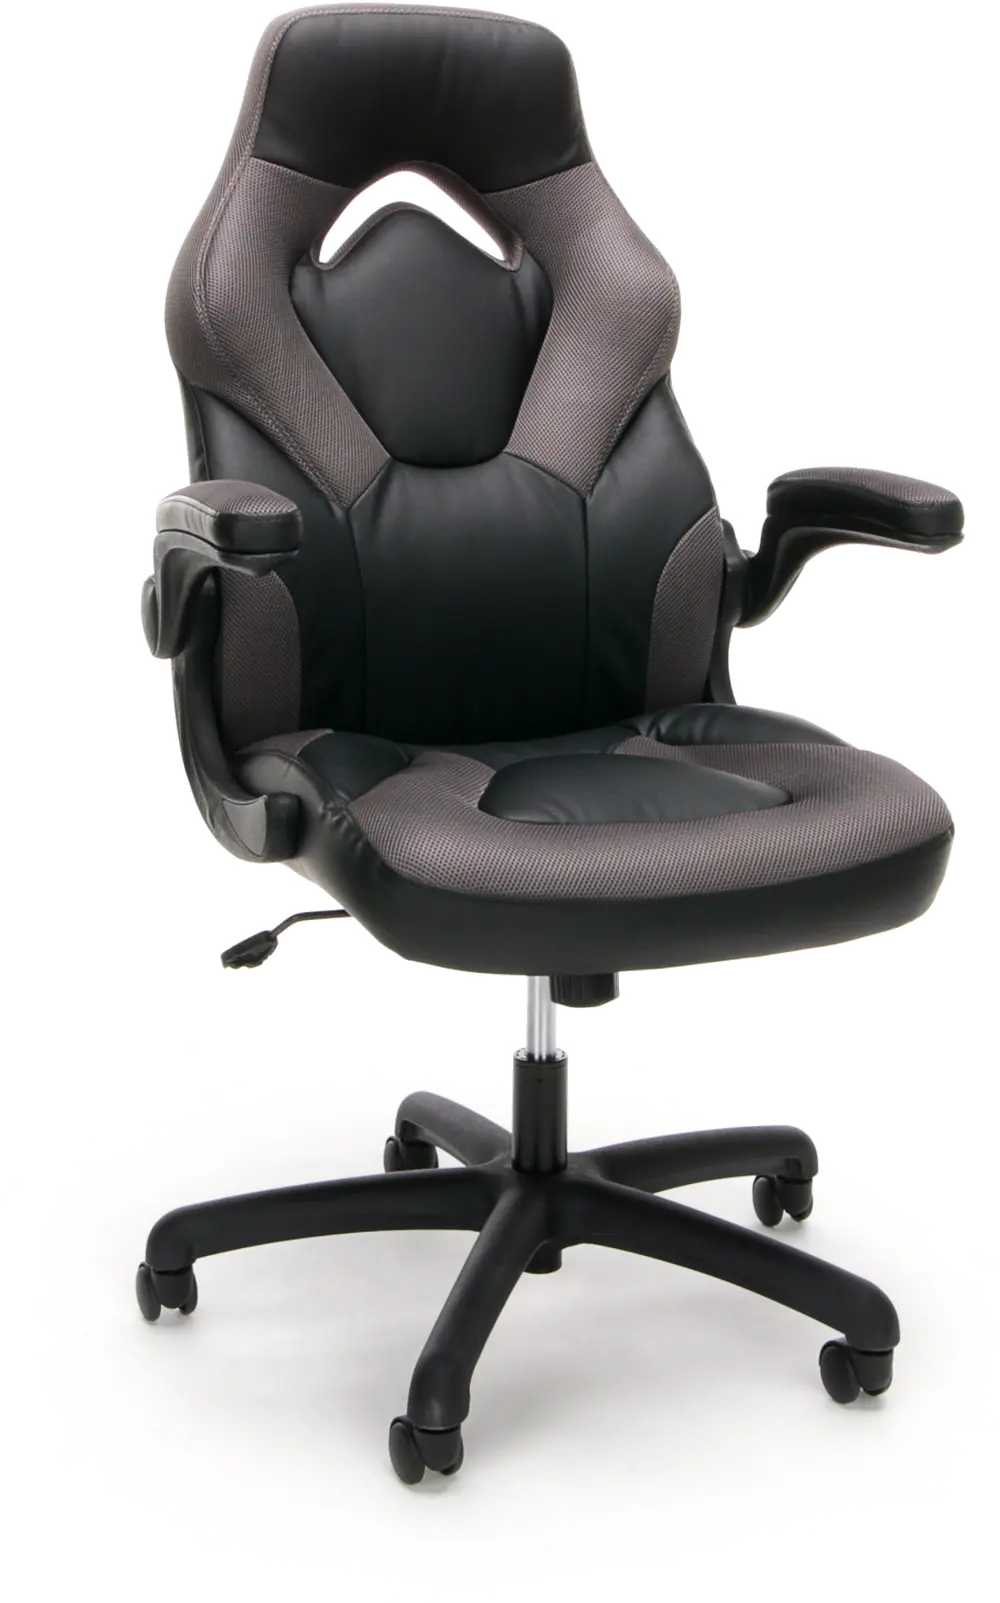 Gray and Black Racing Style Leather Gaming Chair - Essentials -1